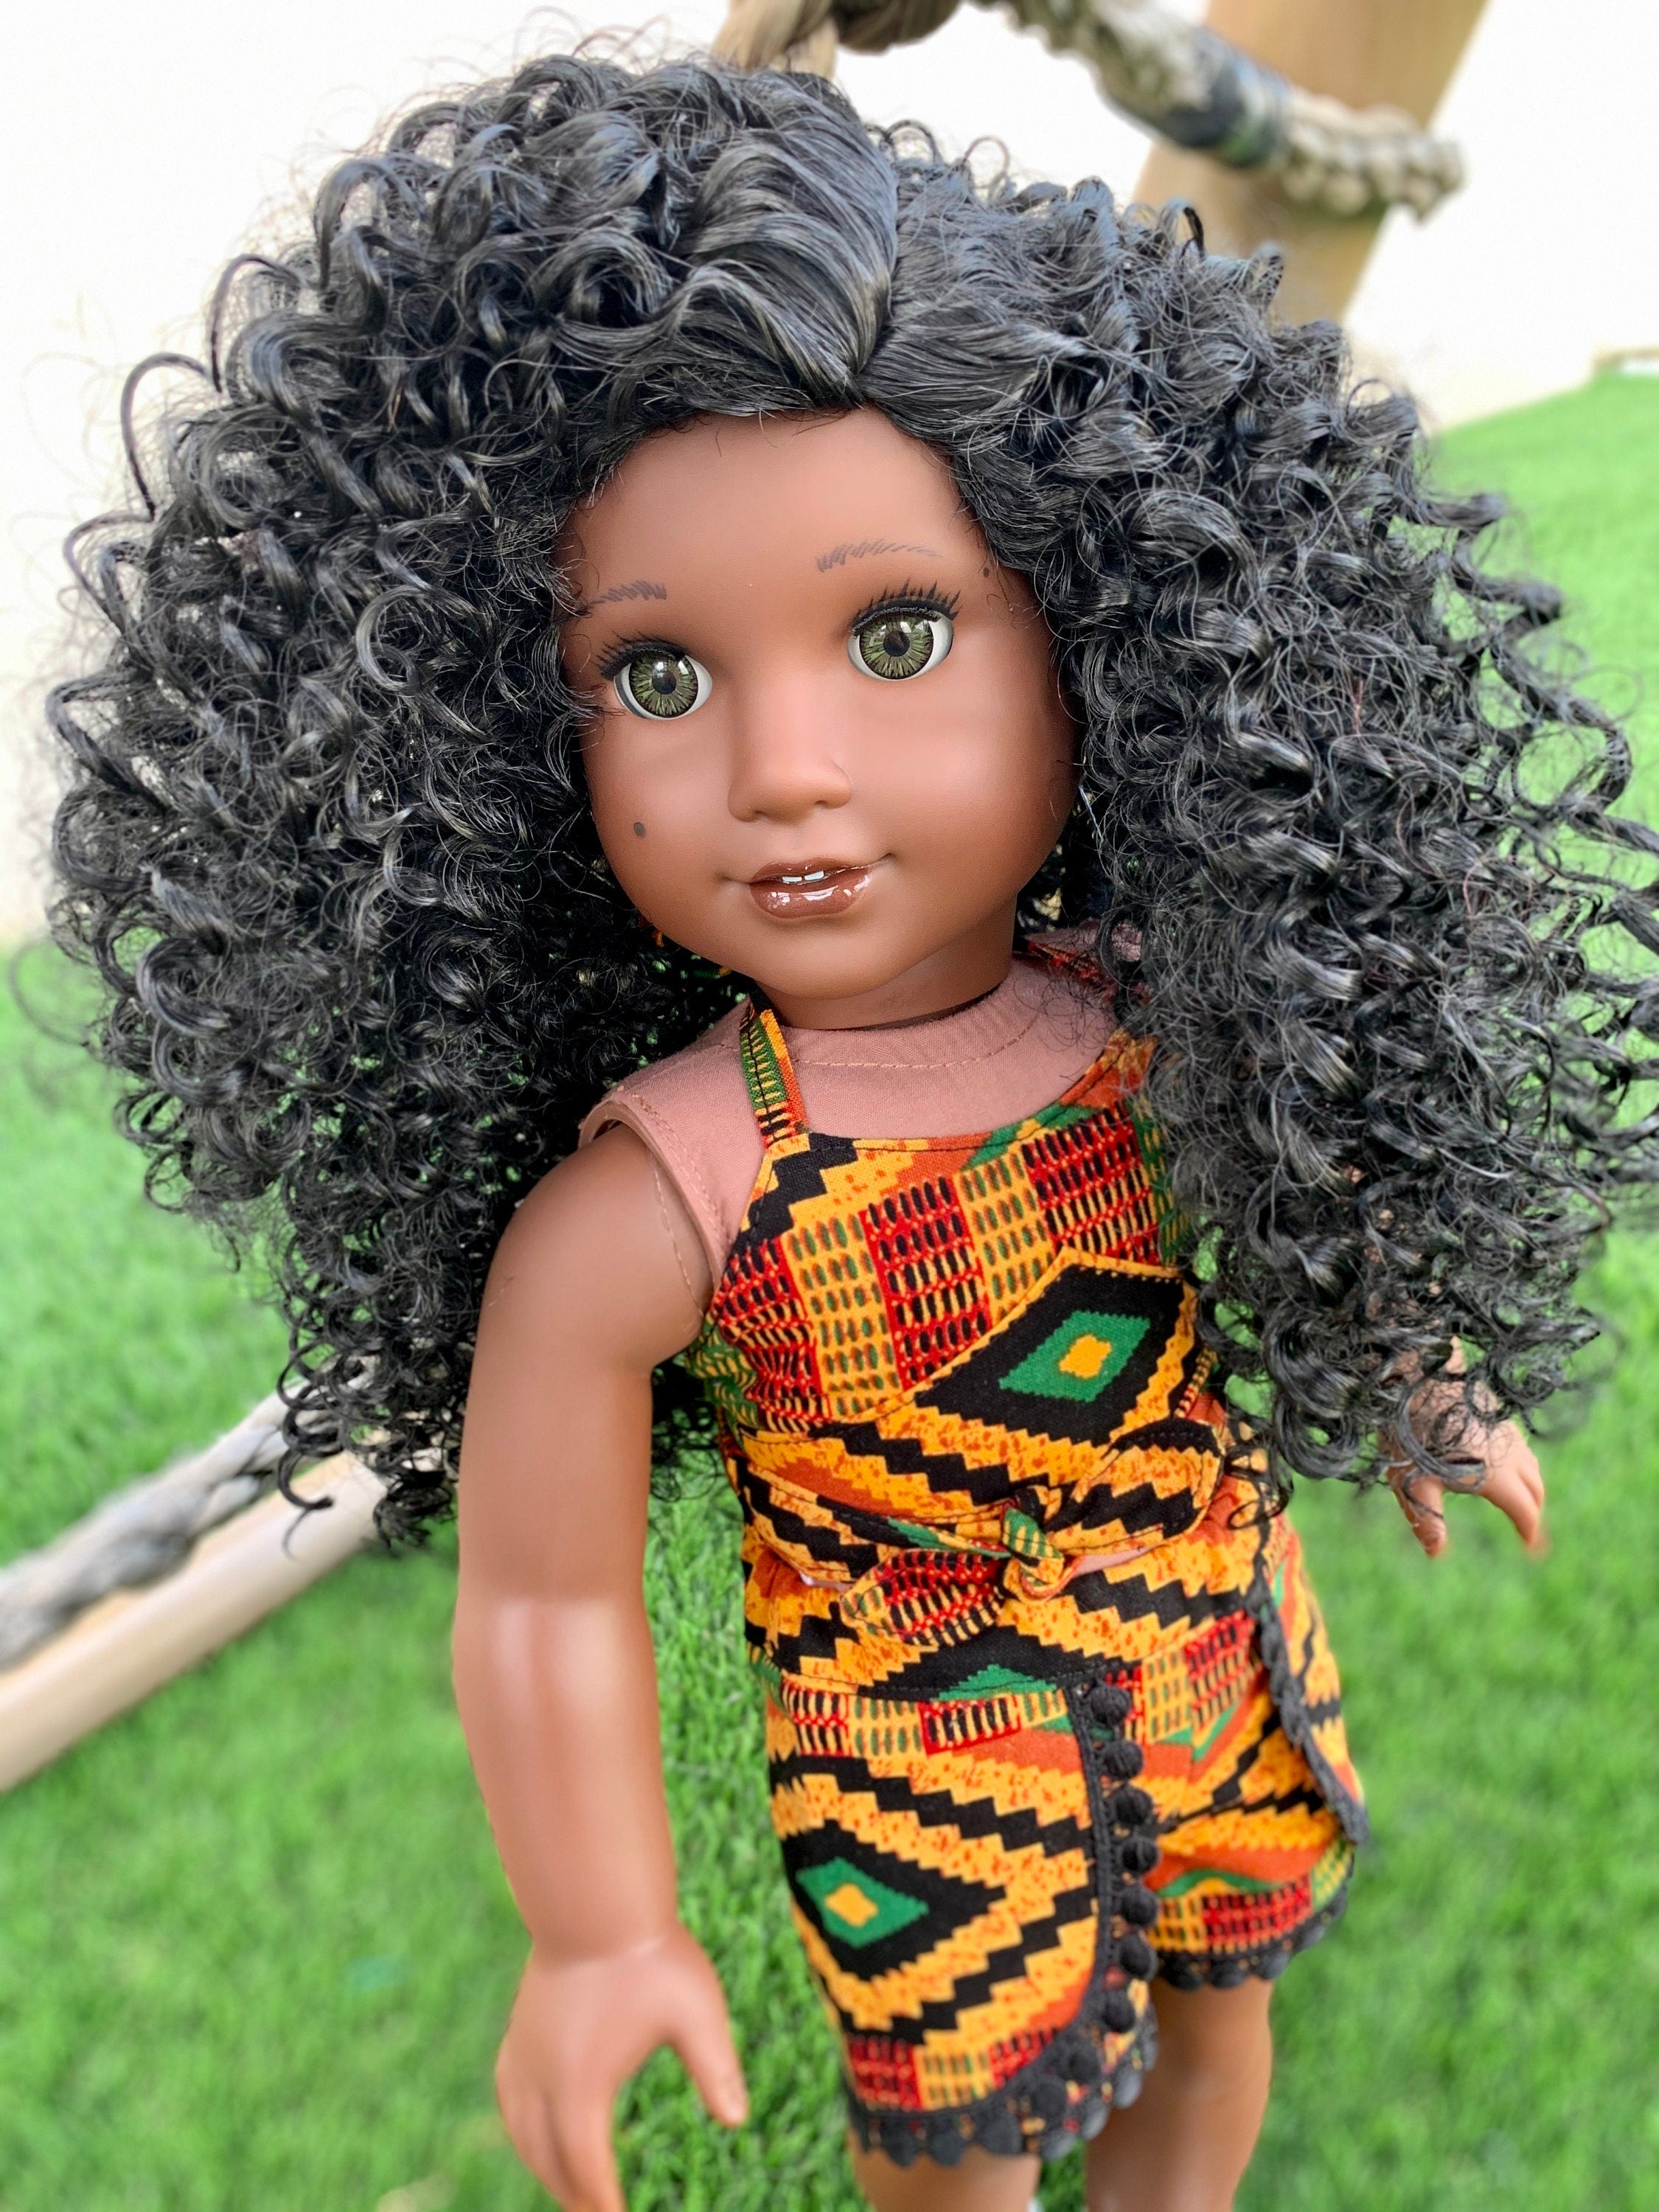 AIDOLLA Doll Wigs for 18'' American Dolls, Girls Gift Heat Resistant Long  Curly Braids Hair Replacement Wigs for 18'' Dolls DIY Making Supplie (11)